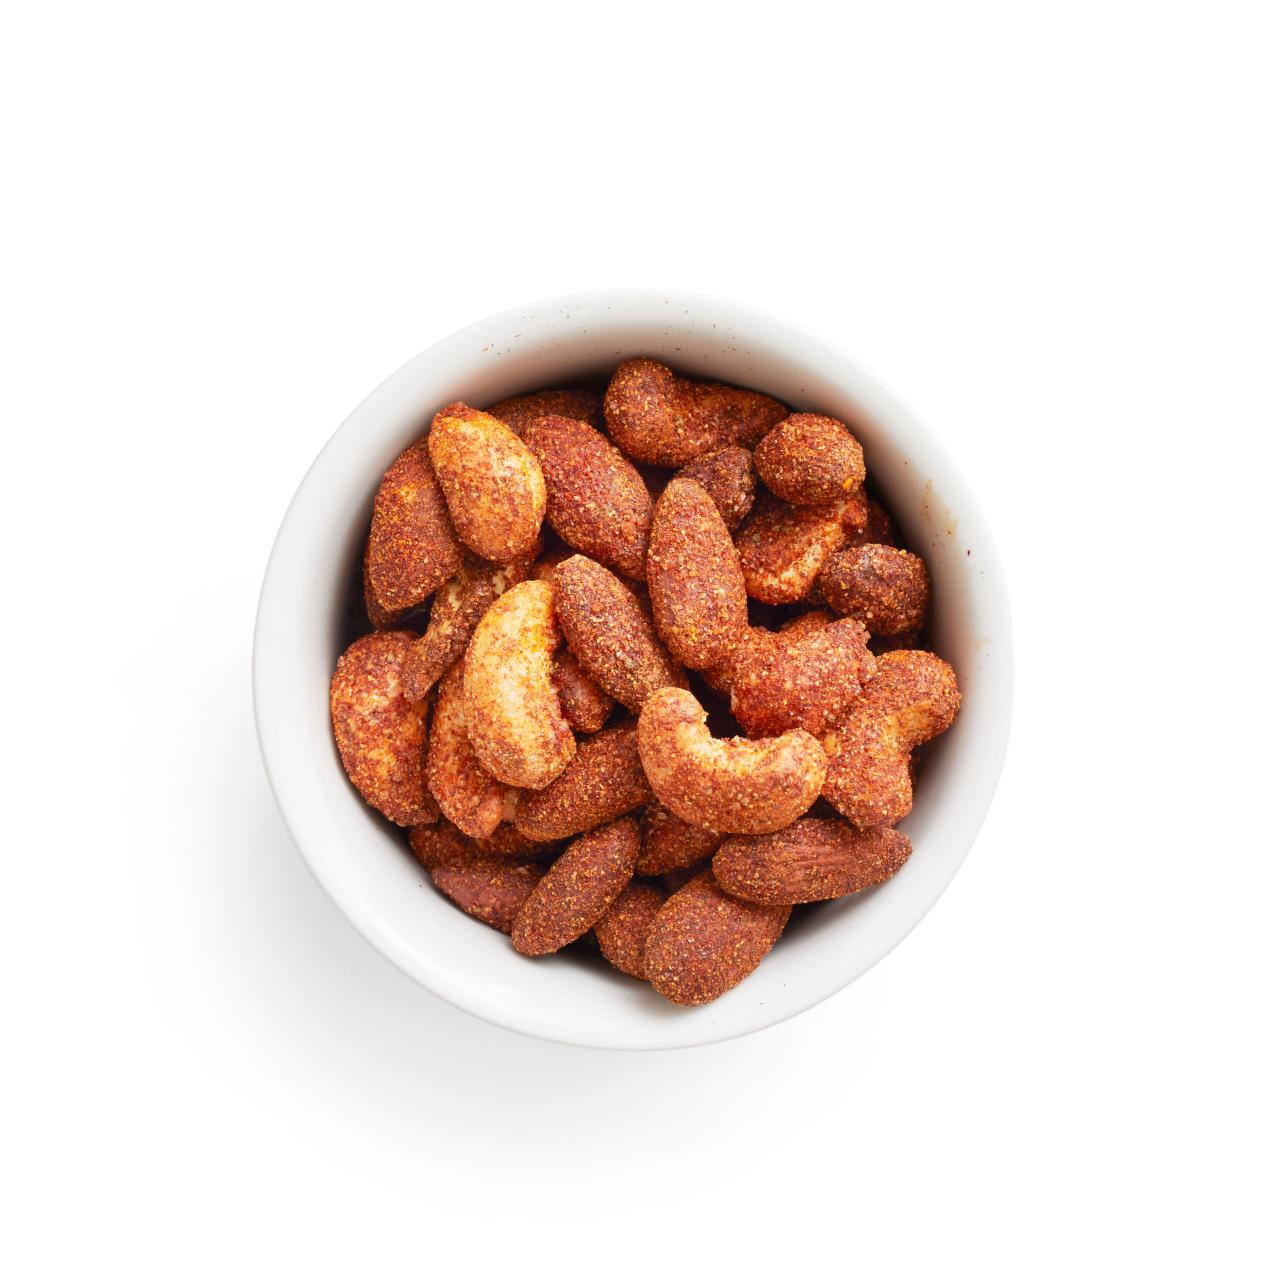 Honey Roasted Cinnamon + Smoked Paprika Nuts – A Cup of Sugar … A